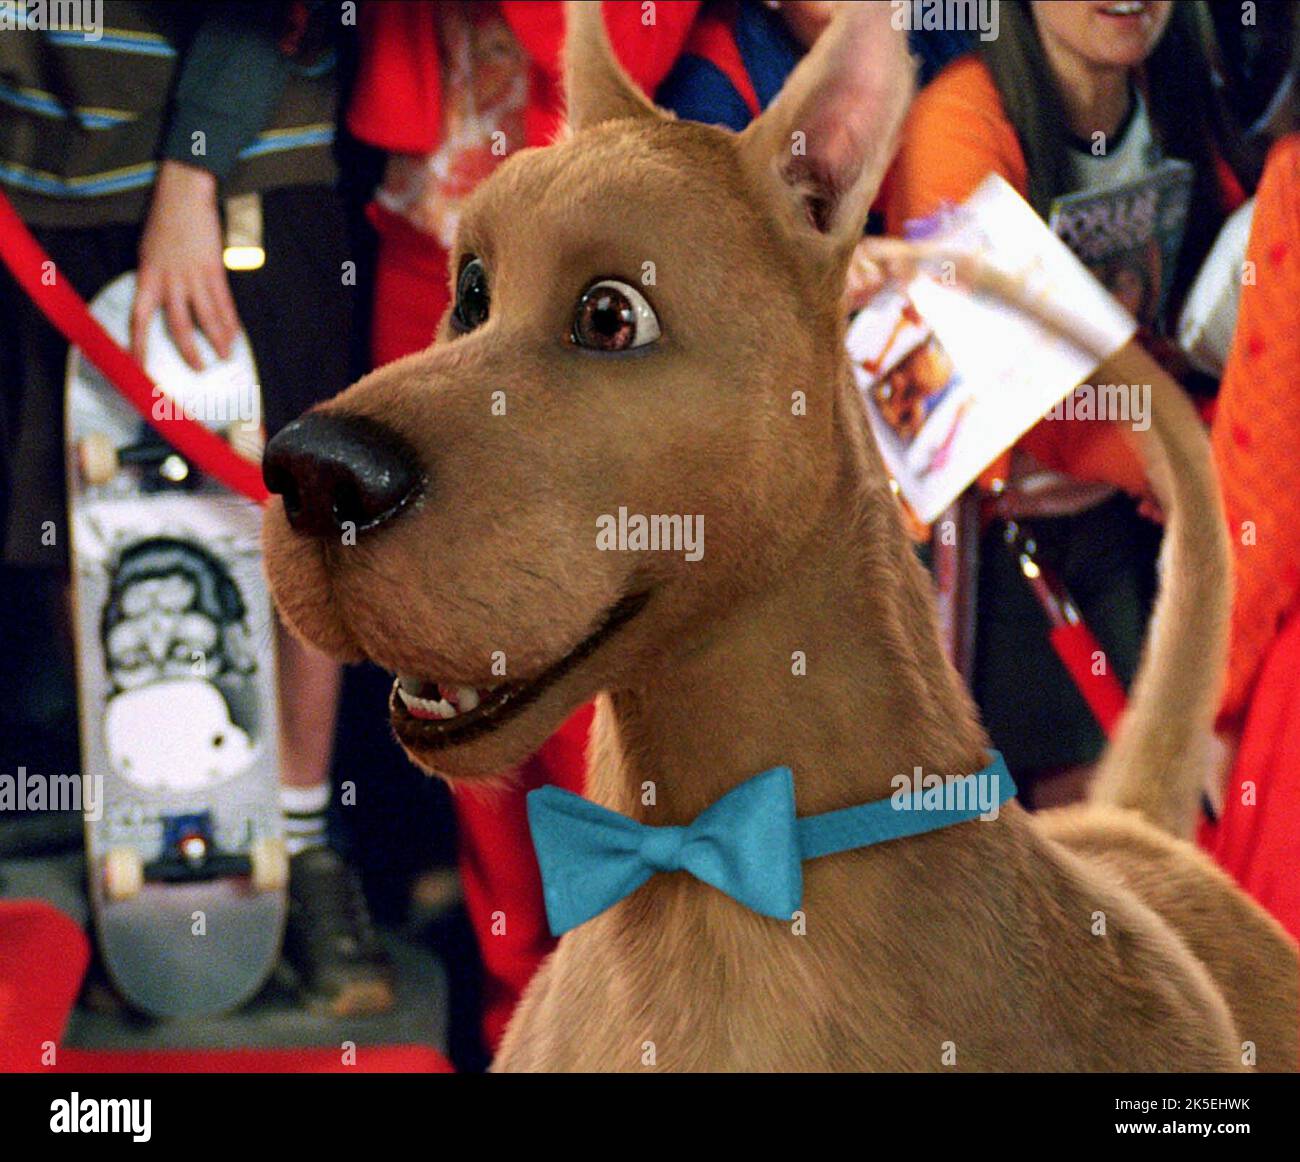 SCOOBY SCOOBY-DOO 2: MONSTERS UNLEASHED, 2004 Stockfoto